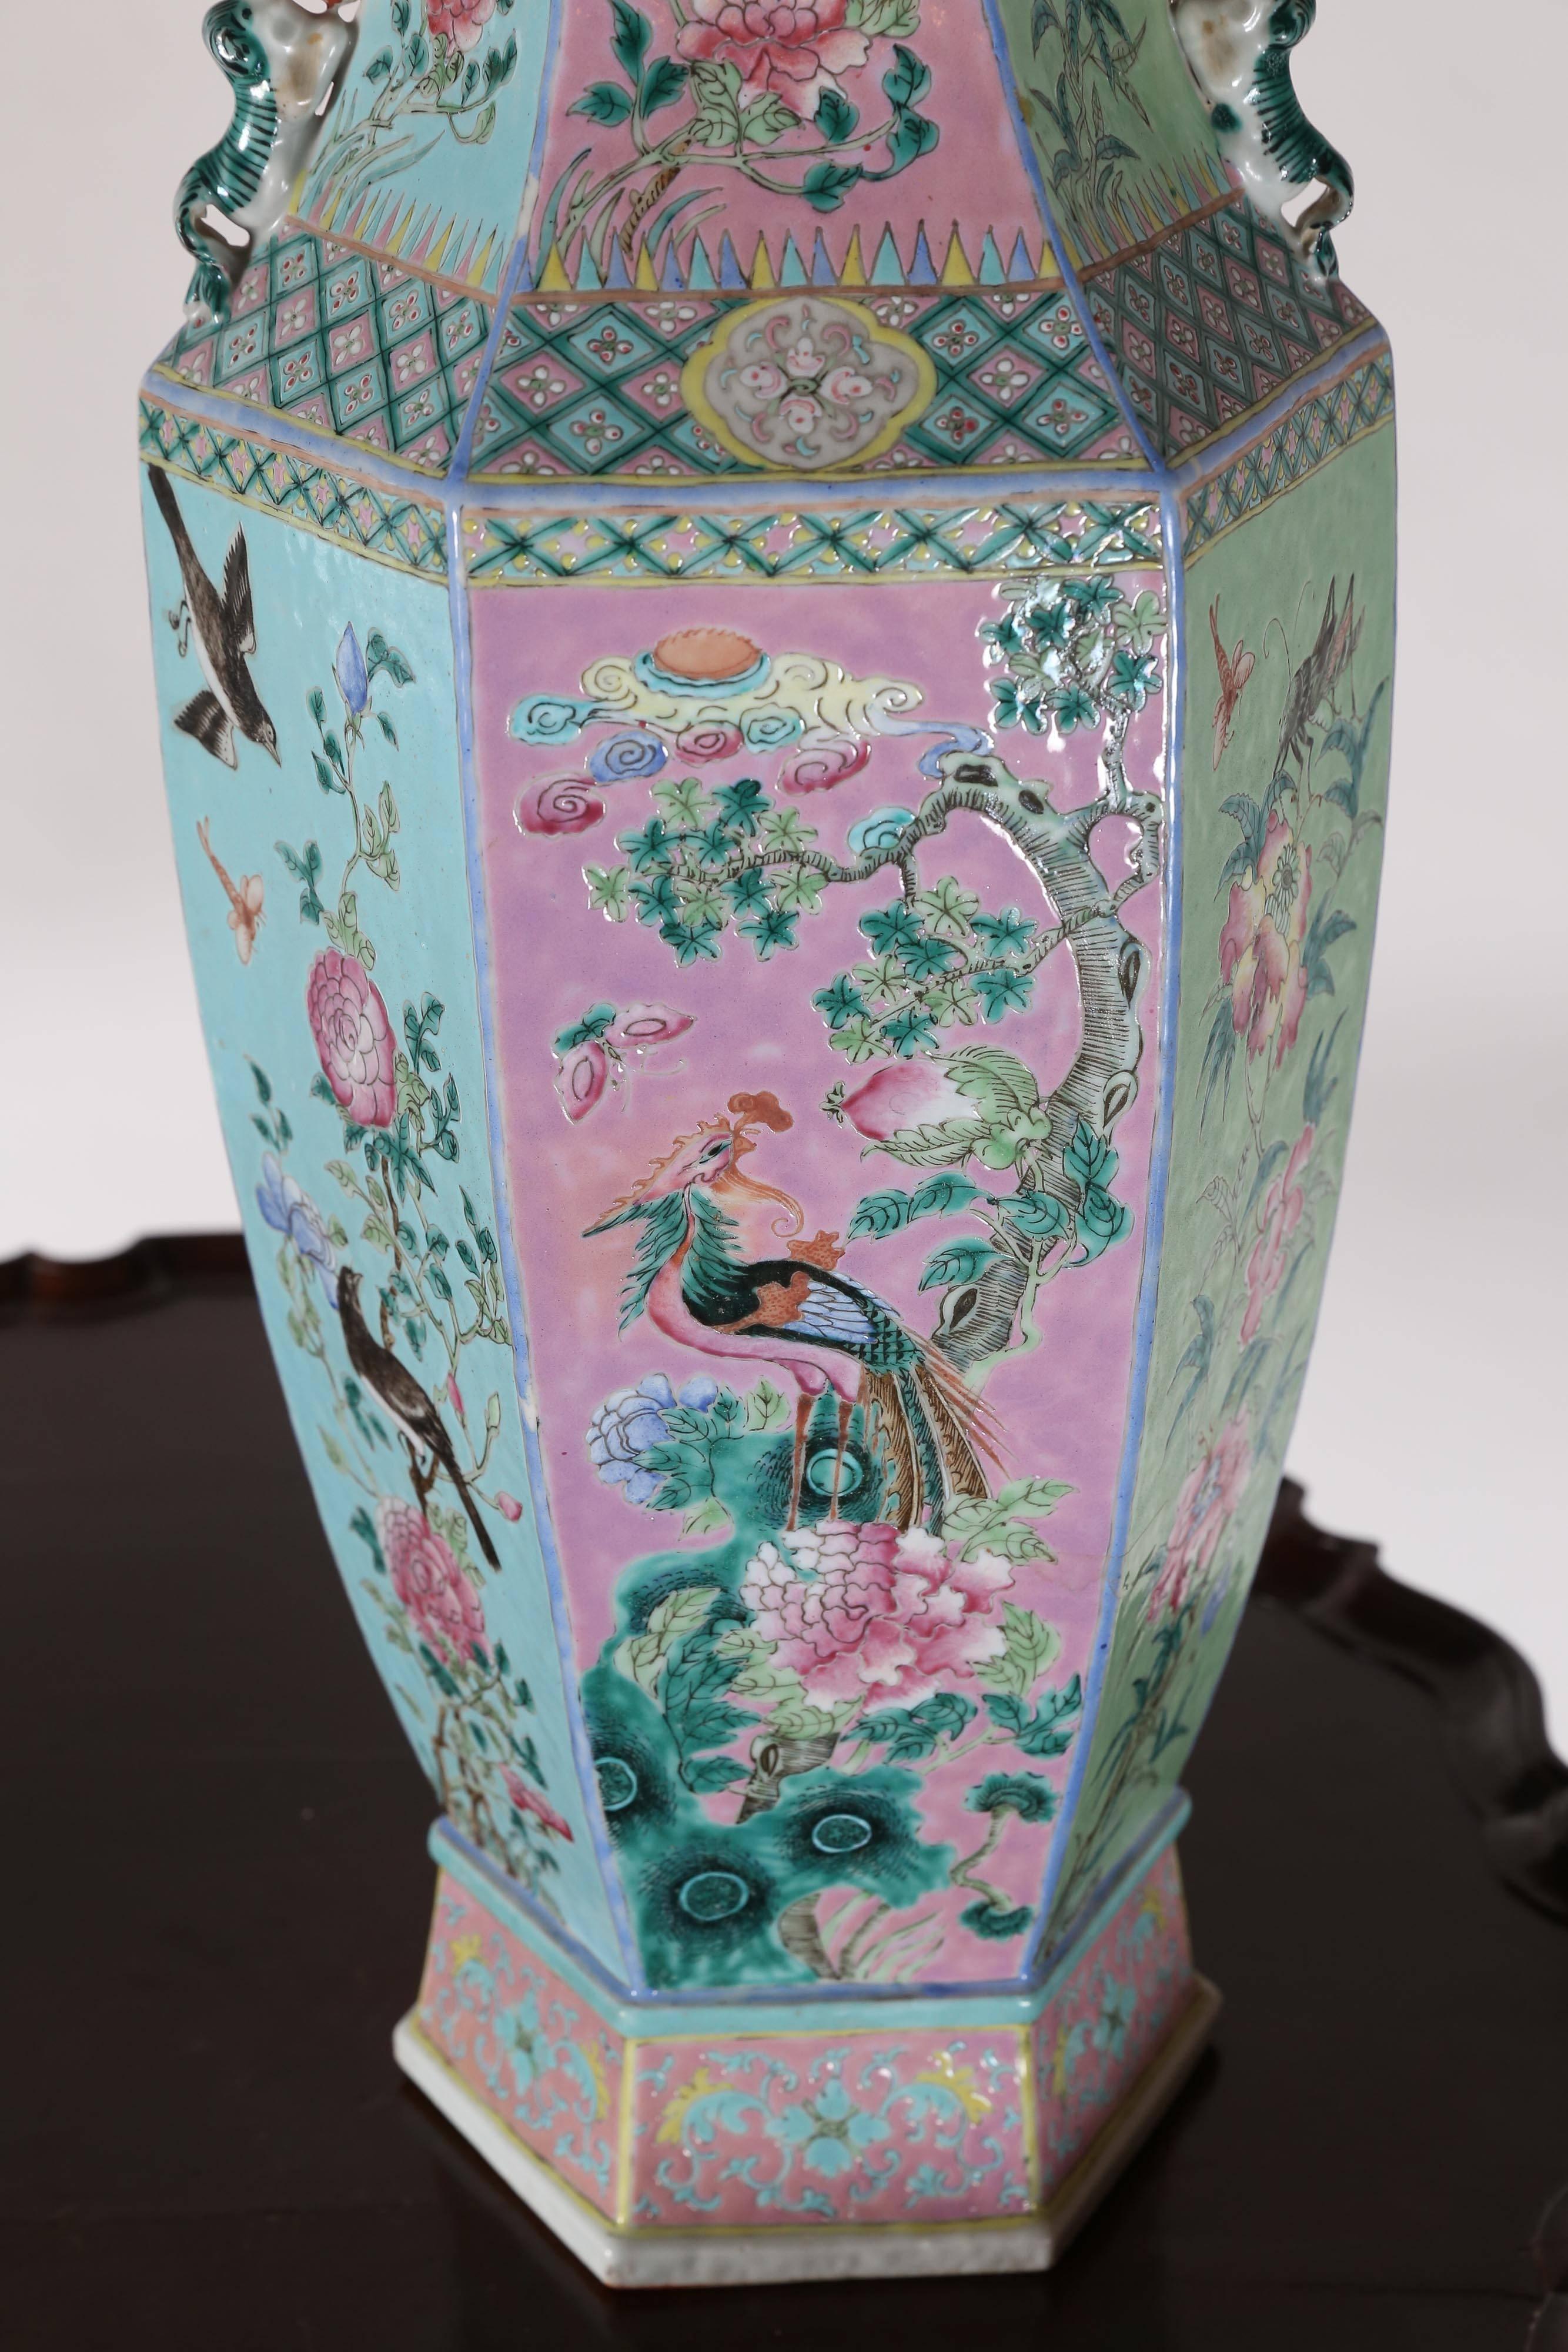 Chinese Hexagon vases feature patterns painted in soft pinks, greens, and blues.
Pink and rose-colored flowers have stems with lovely shaded leaves of various greens.

Colorful birds and insects are quite charming (my favorite being the